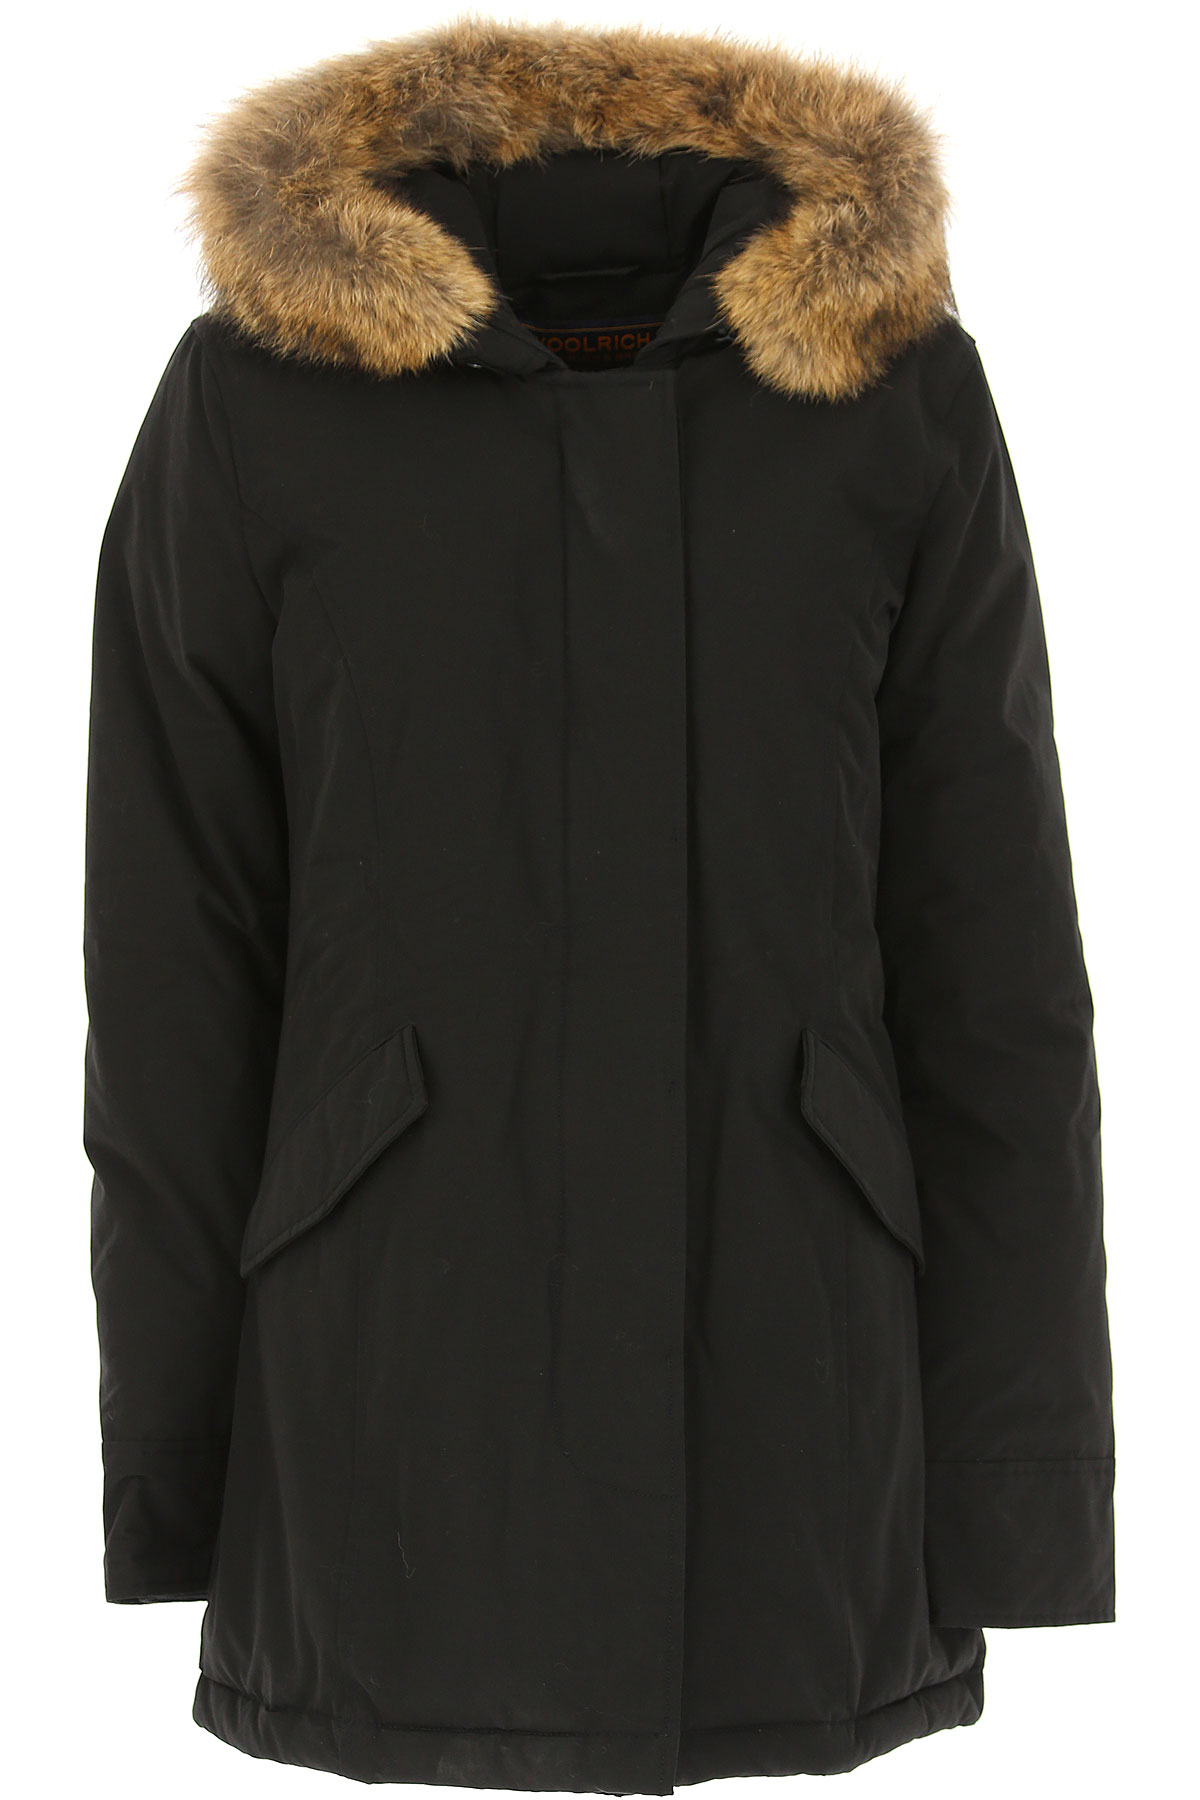 Womens Clothing Woolrich, Style code: wwcps1446-cn02-blk